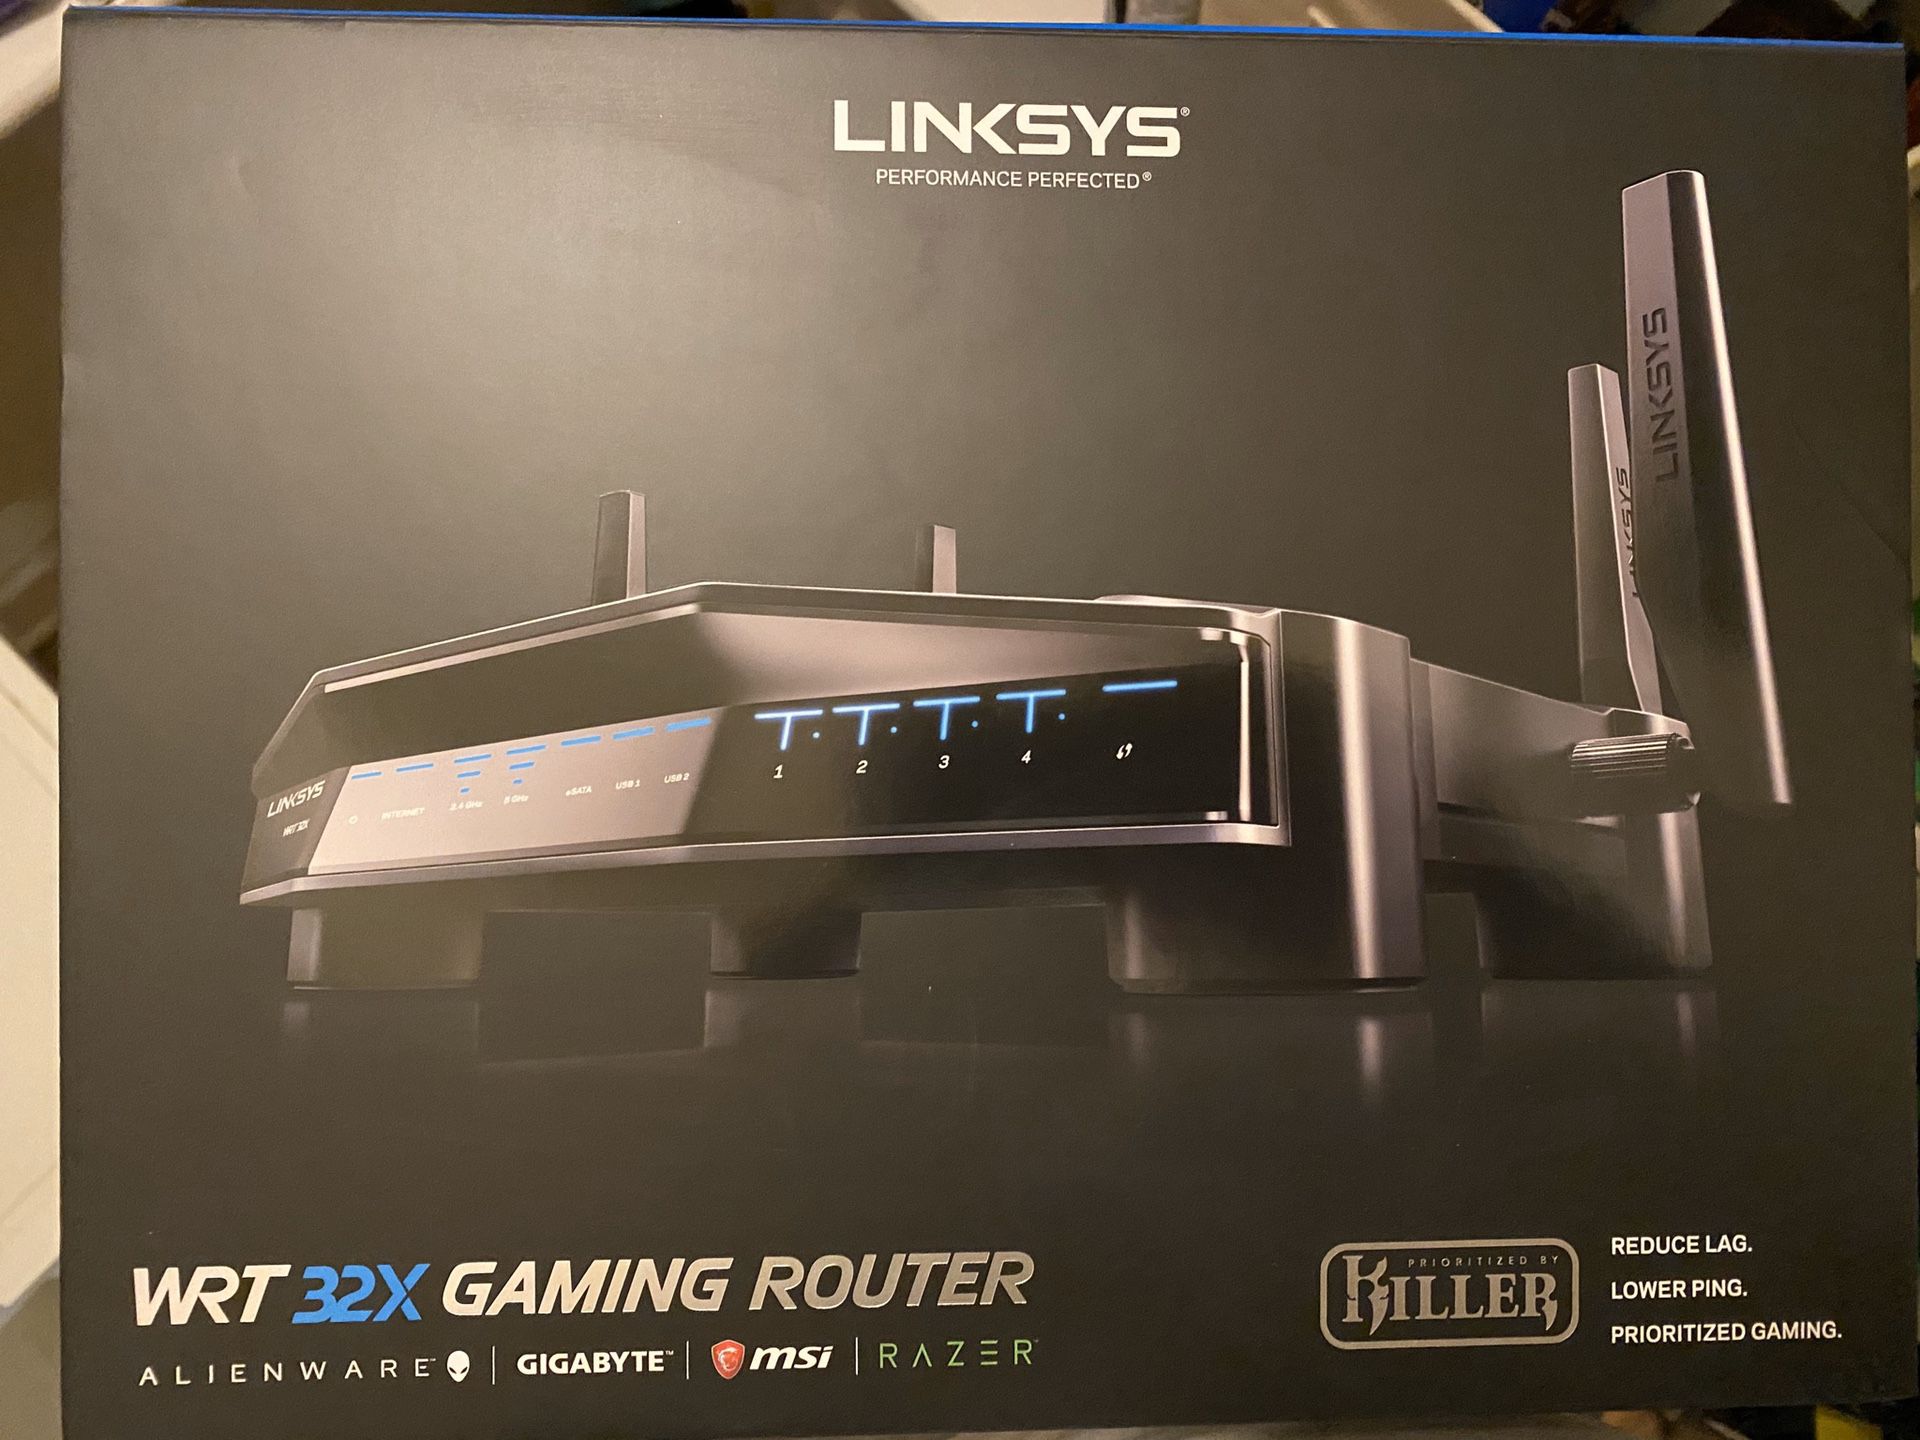 Linksys WRT32X AC3200 Dual Band WiFi Gaming Router with Killer Prioritization Engine